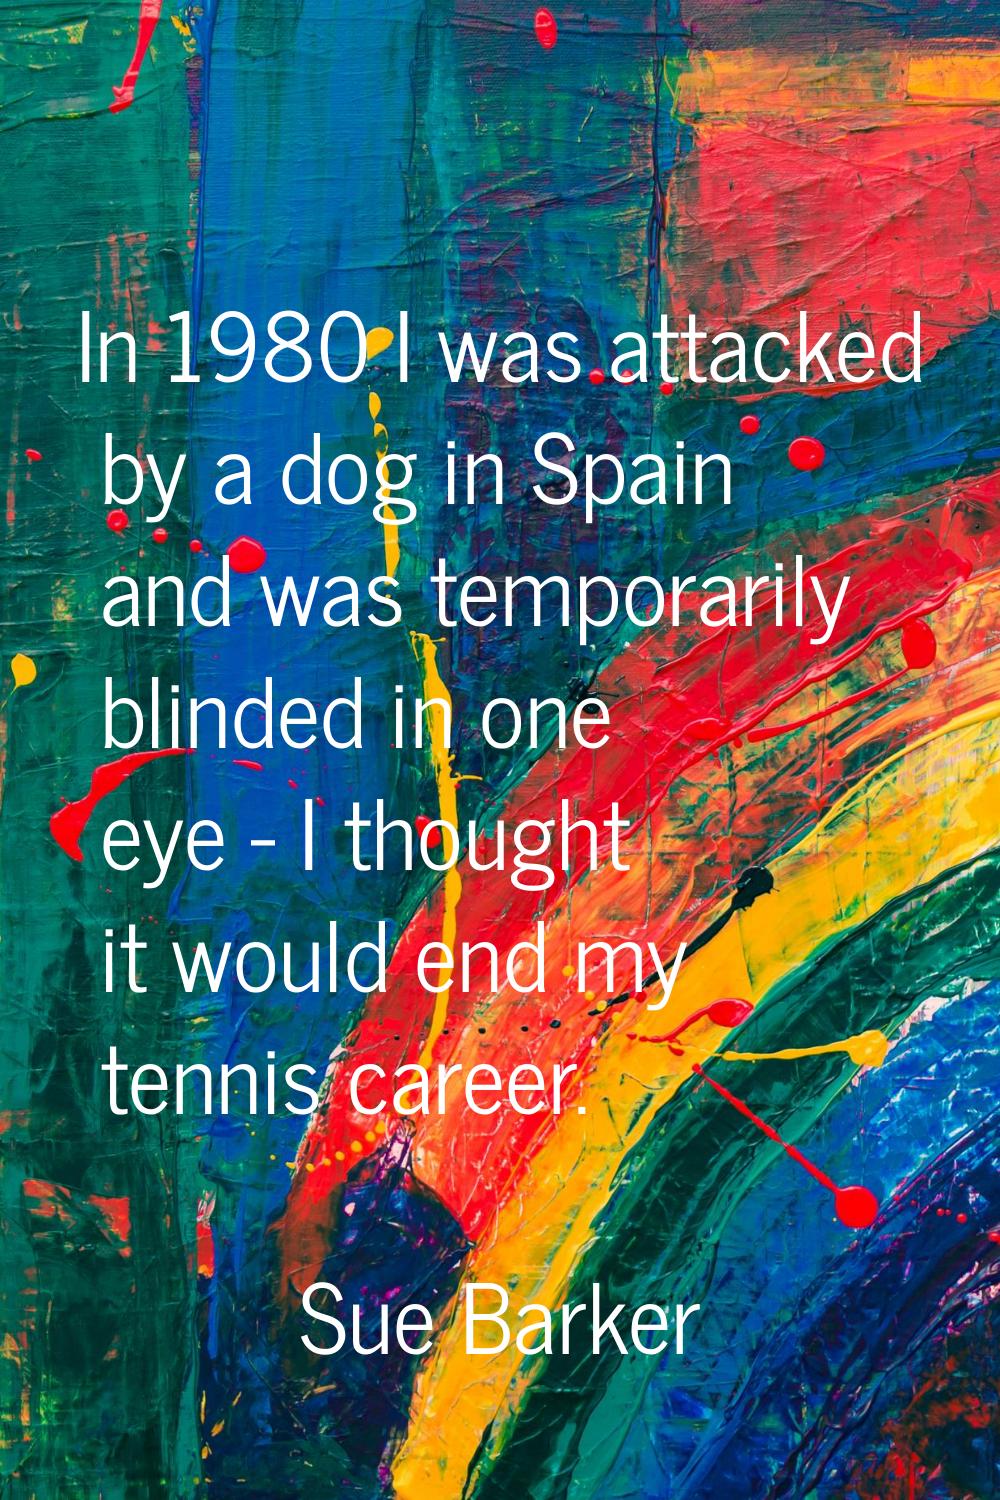 In 1980 I was attacked by a dog in Spain and was temporarily blinded in one eye - I thought it woul